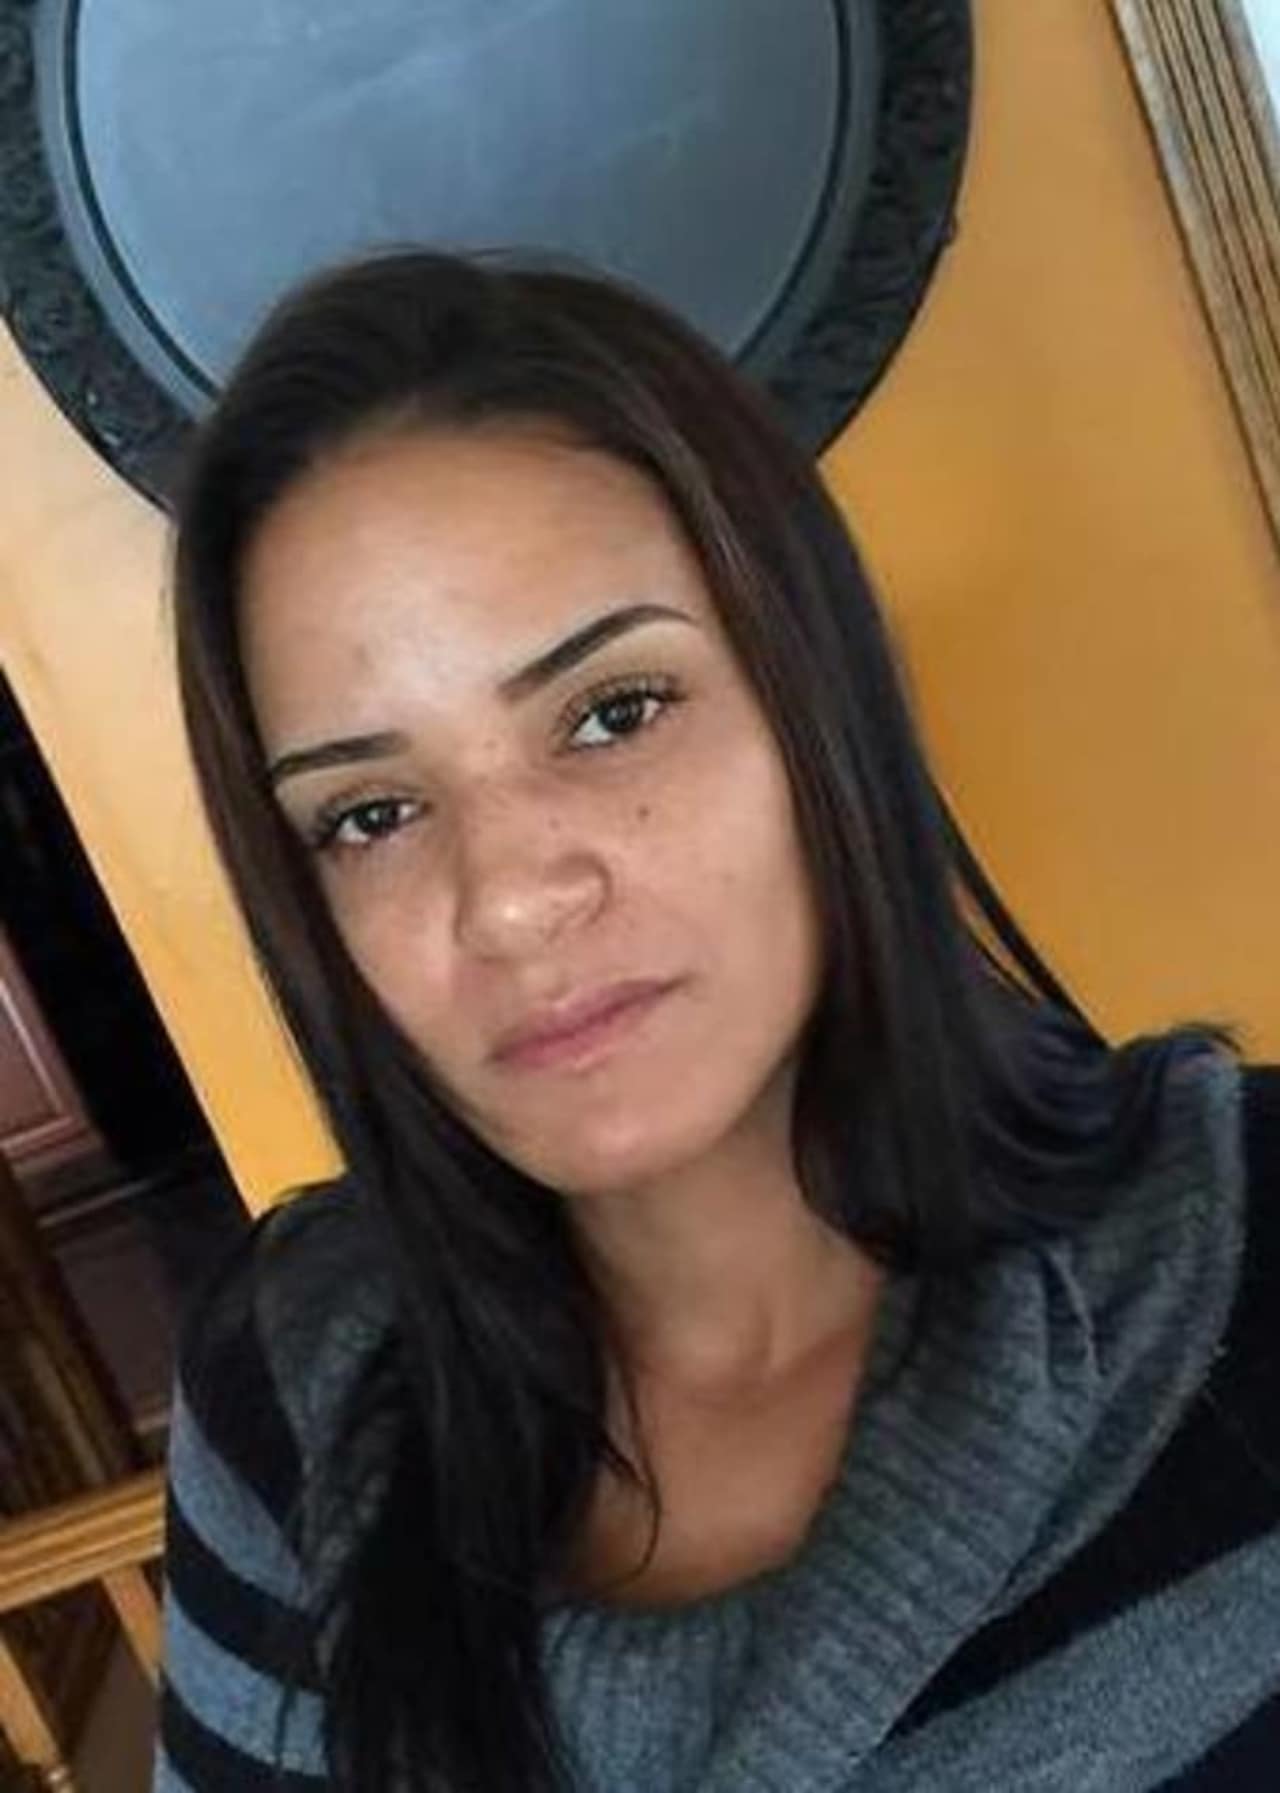 35-year-old April Evans has been missing from Peekskill since before Thanksgiving. She was last seen in Yonkers.